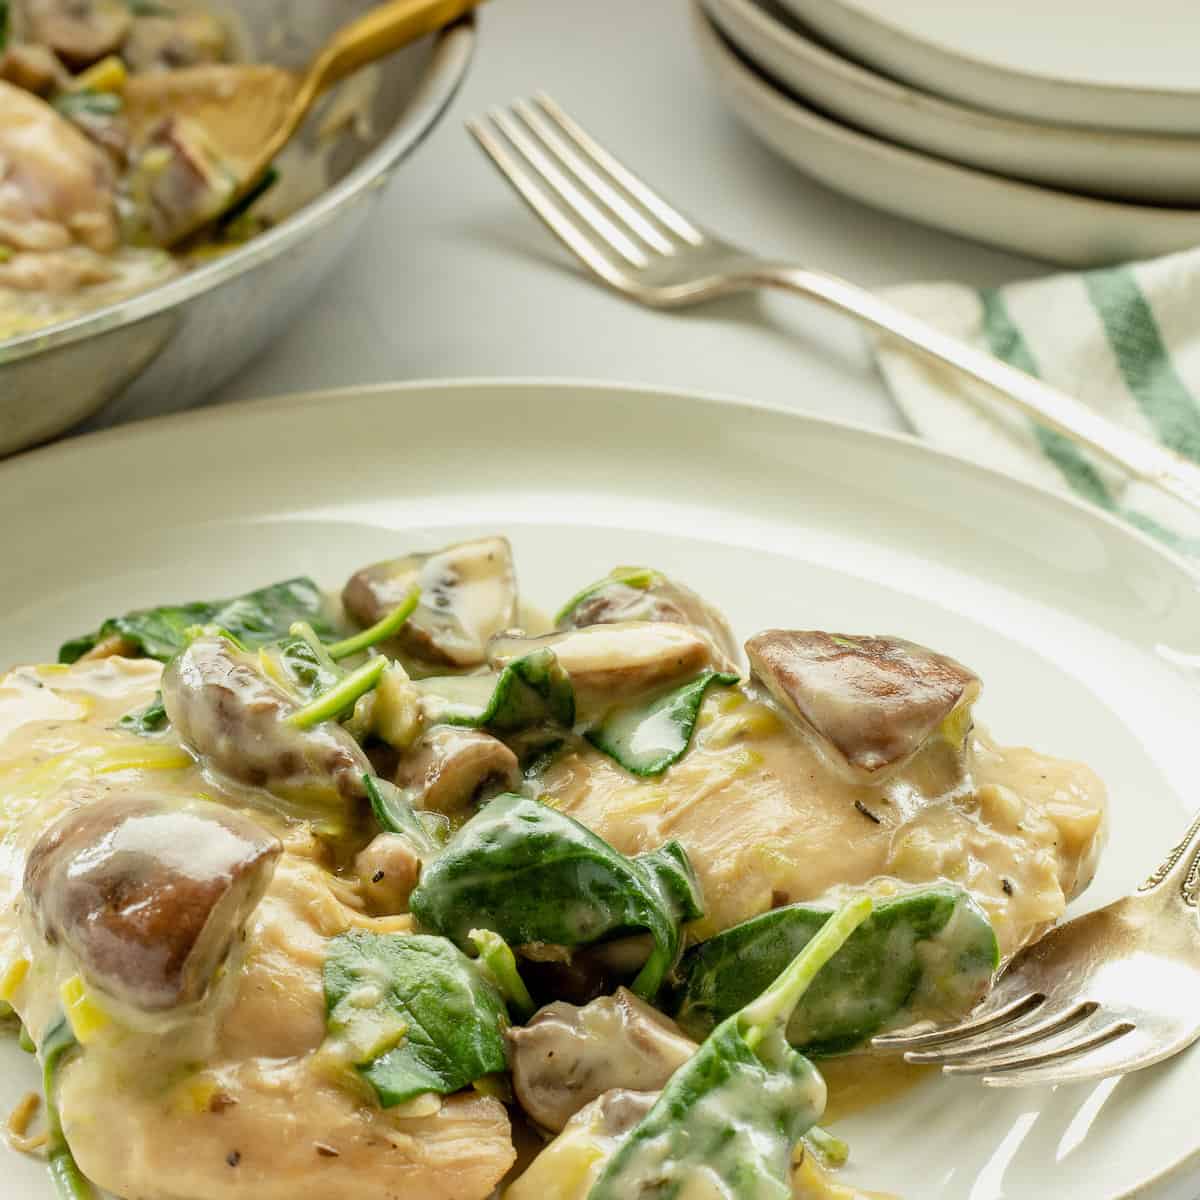 A dinner plate and fork with chicken with spinach and mushrooms in a cream sauce.